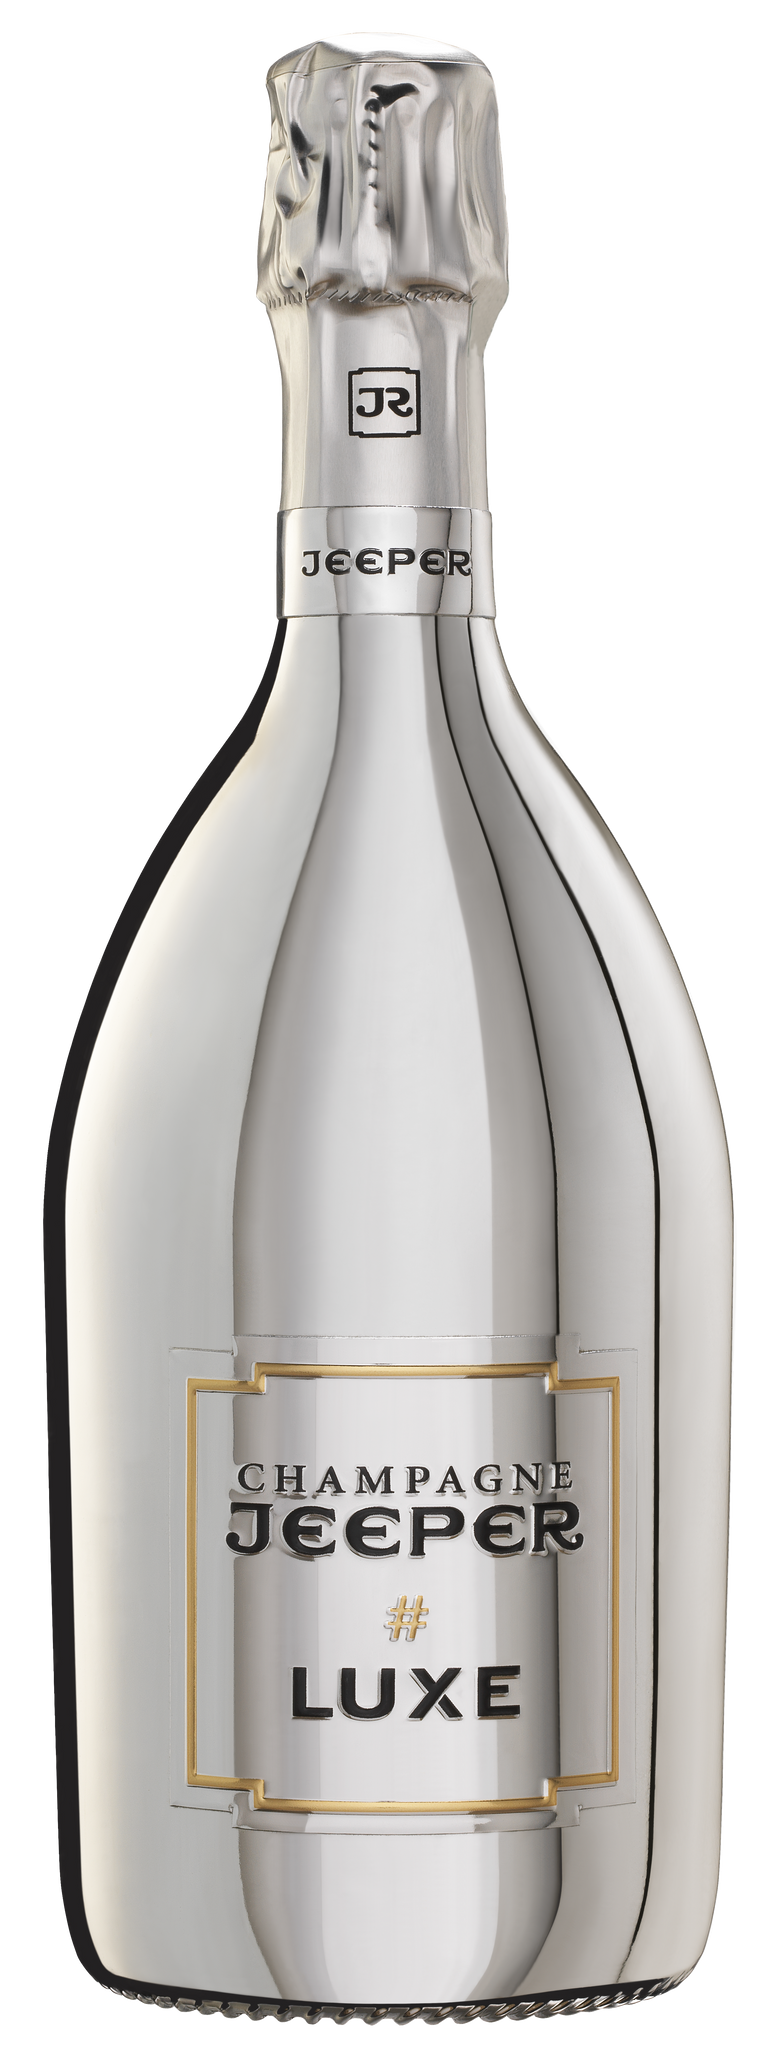 Champagne Jeeper - CUVÉE #Luxe Argent (1x75cl)